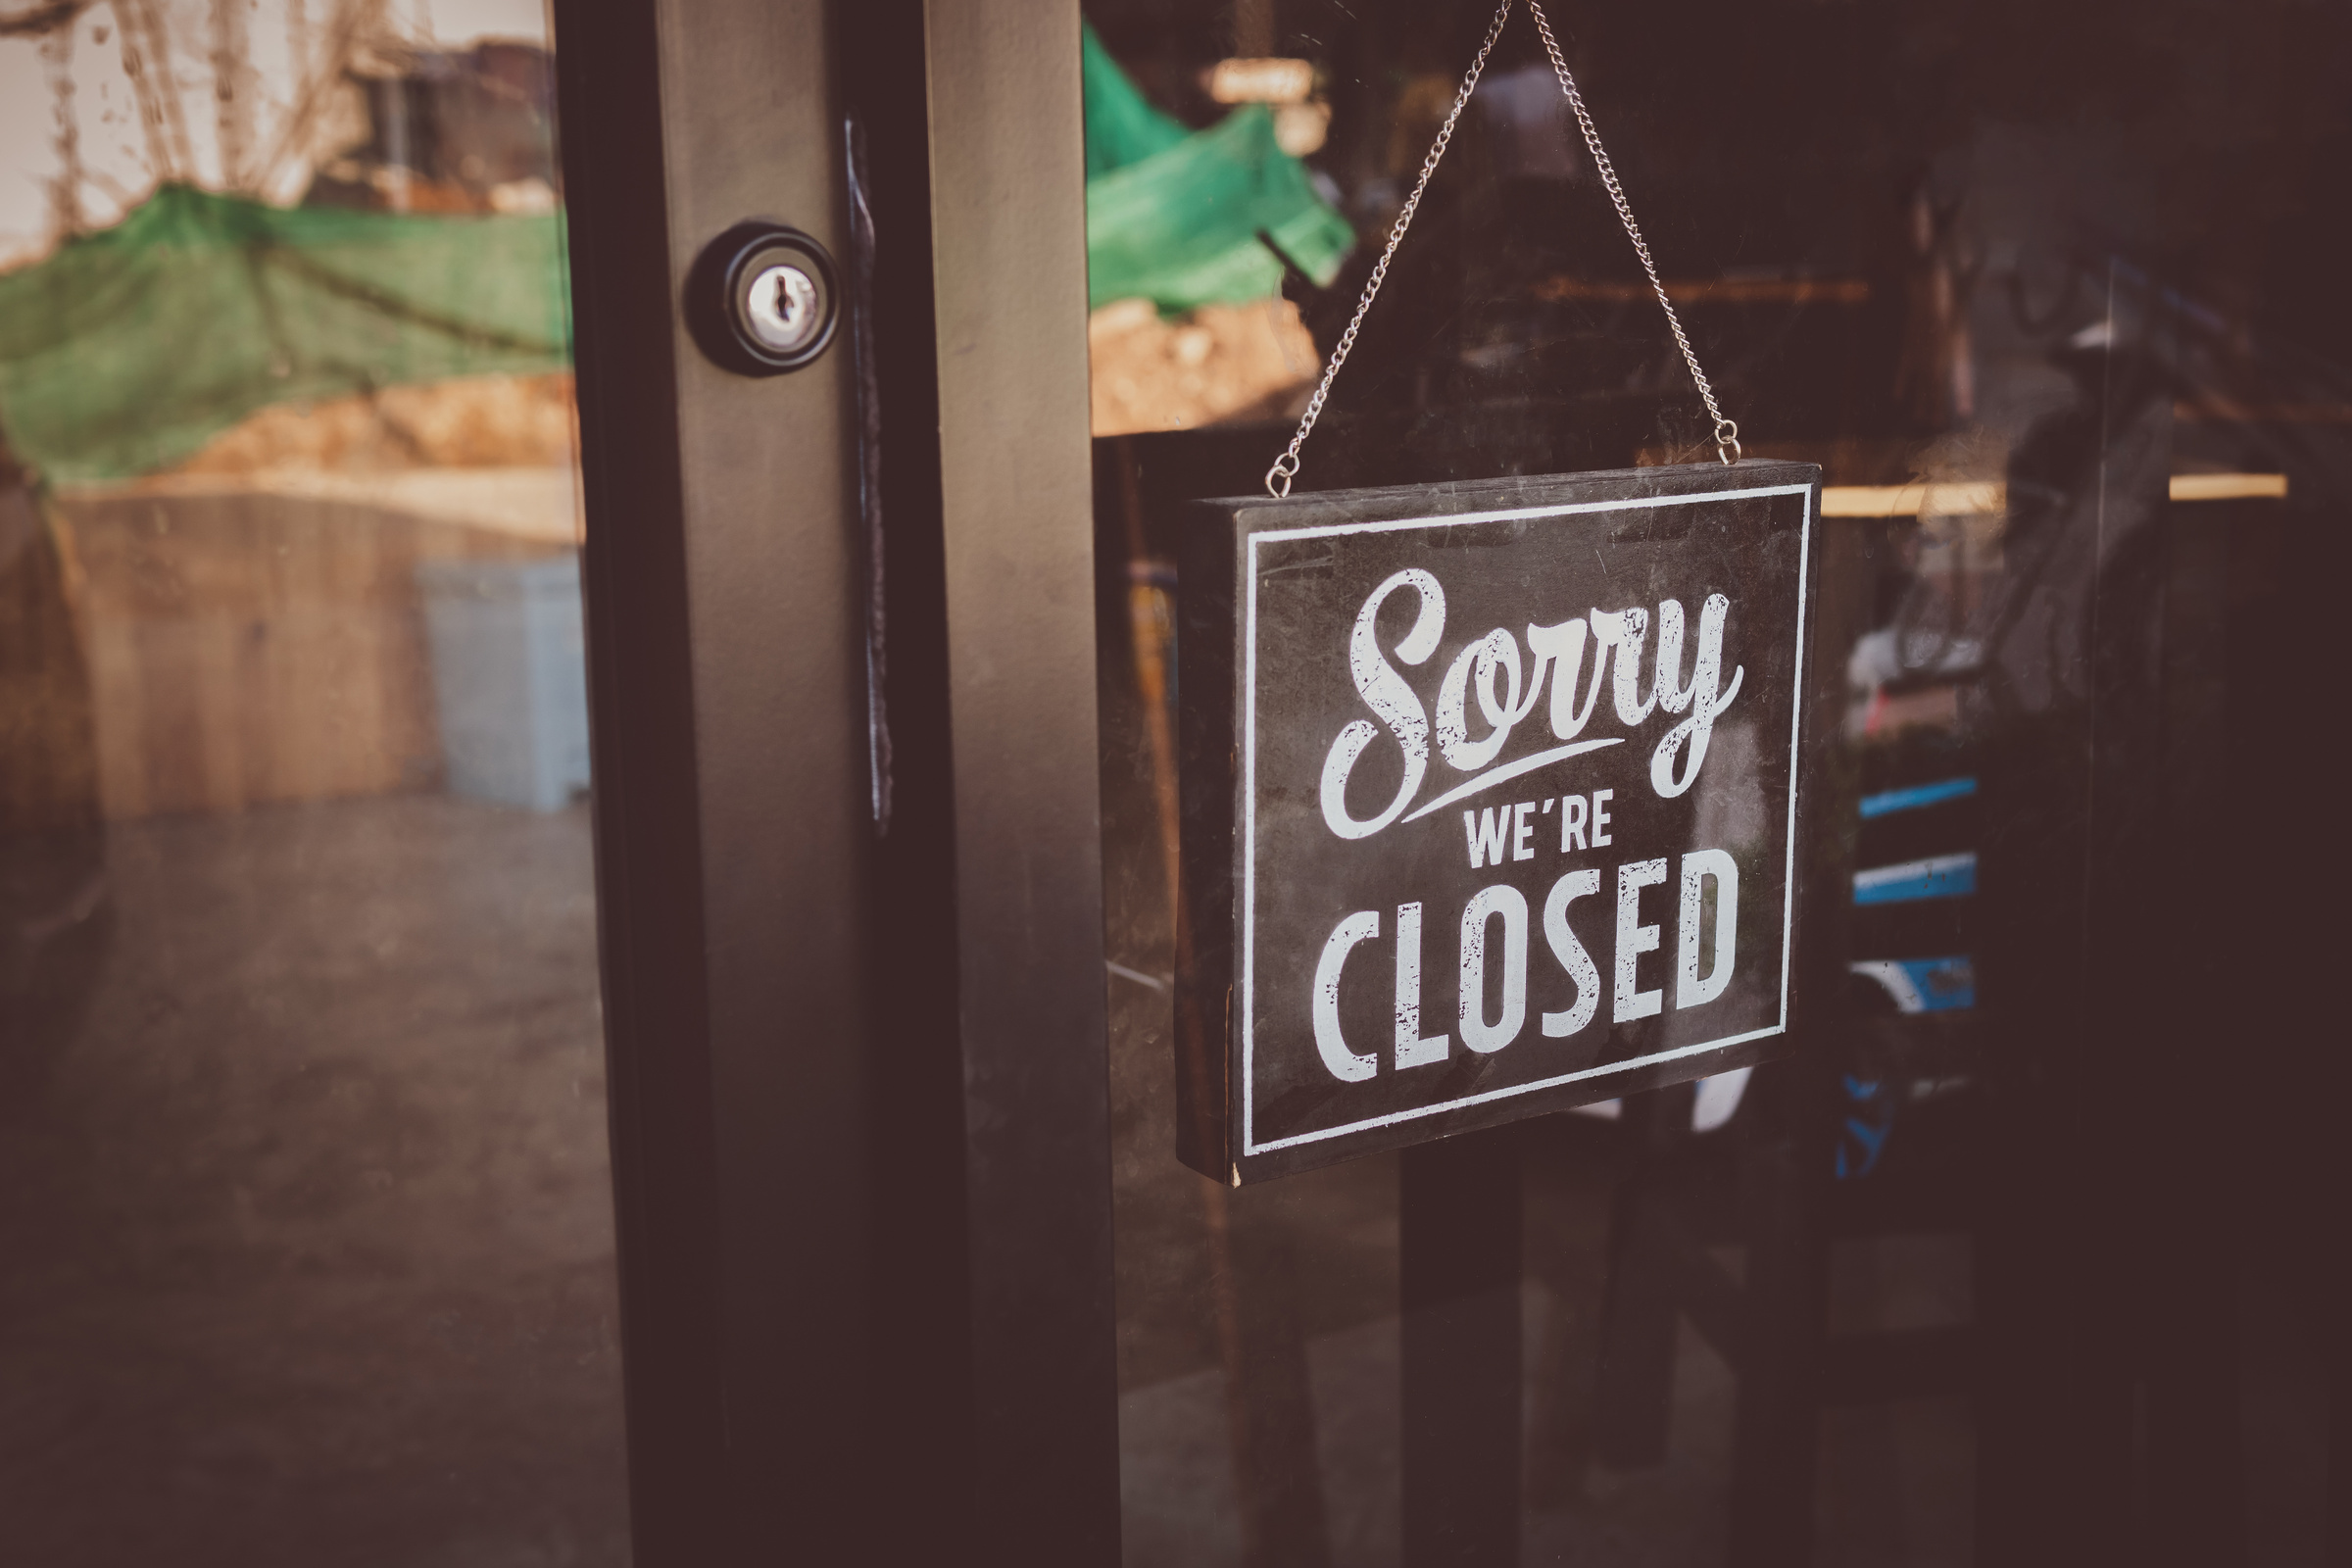 Label 'Sorry we're closed' notice sign wood board hanging on door front coffee shop.